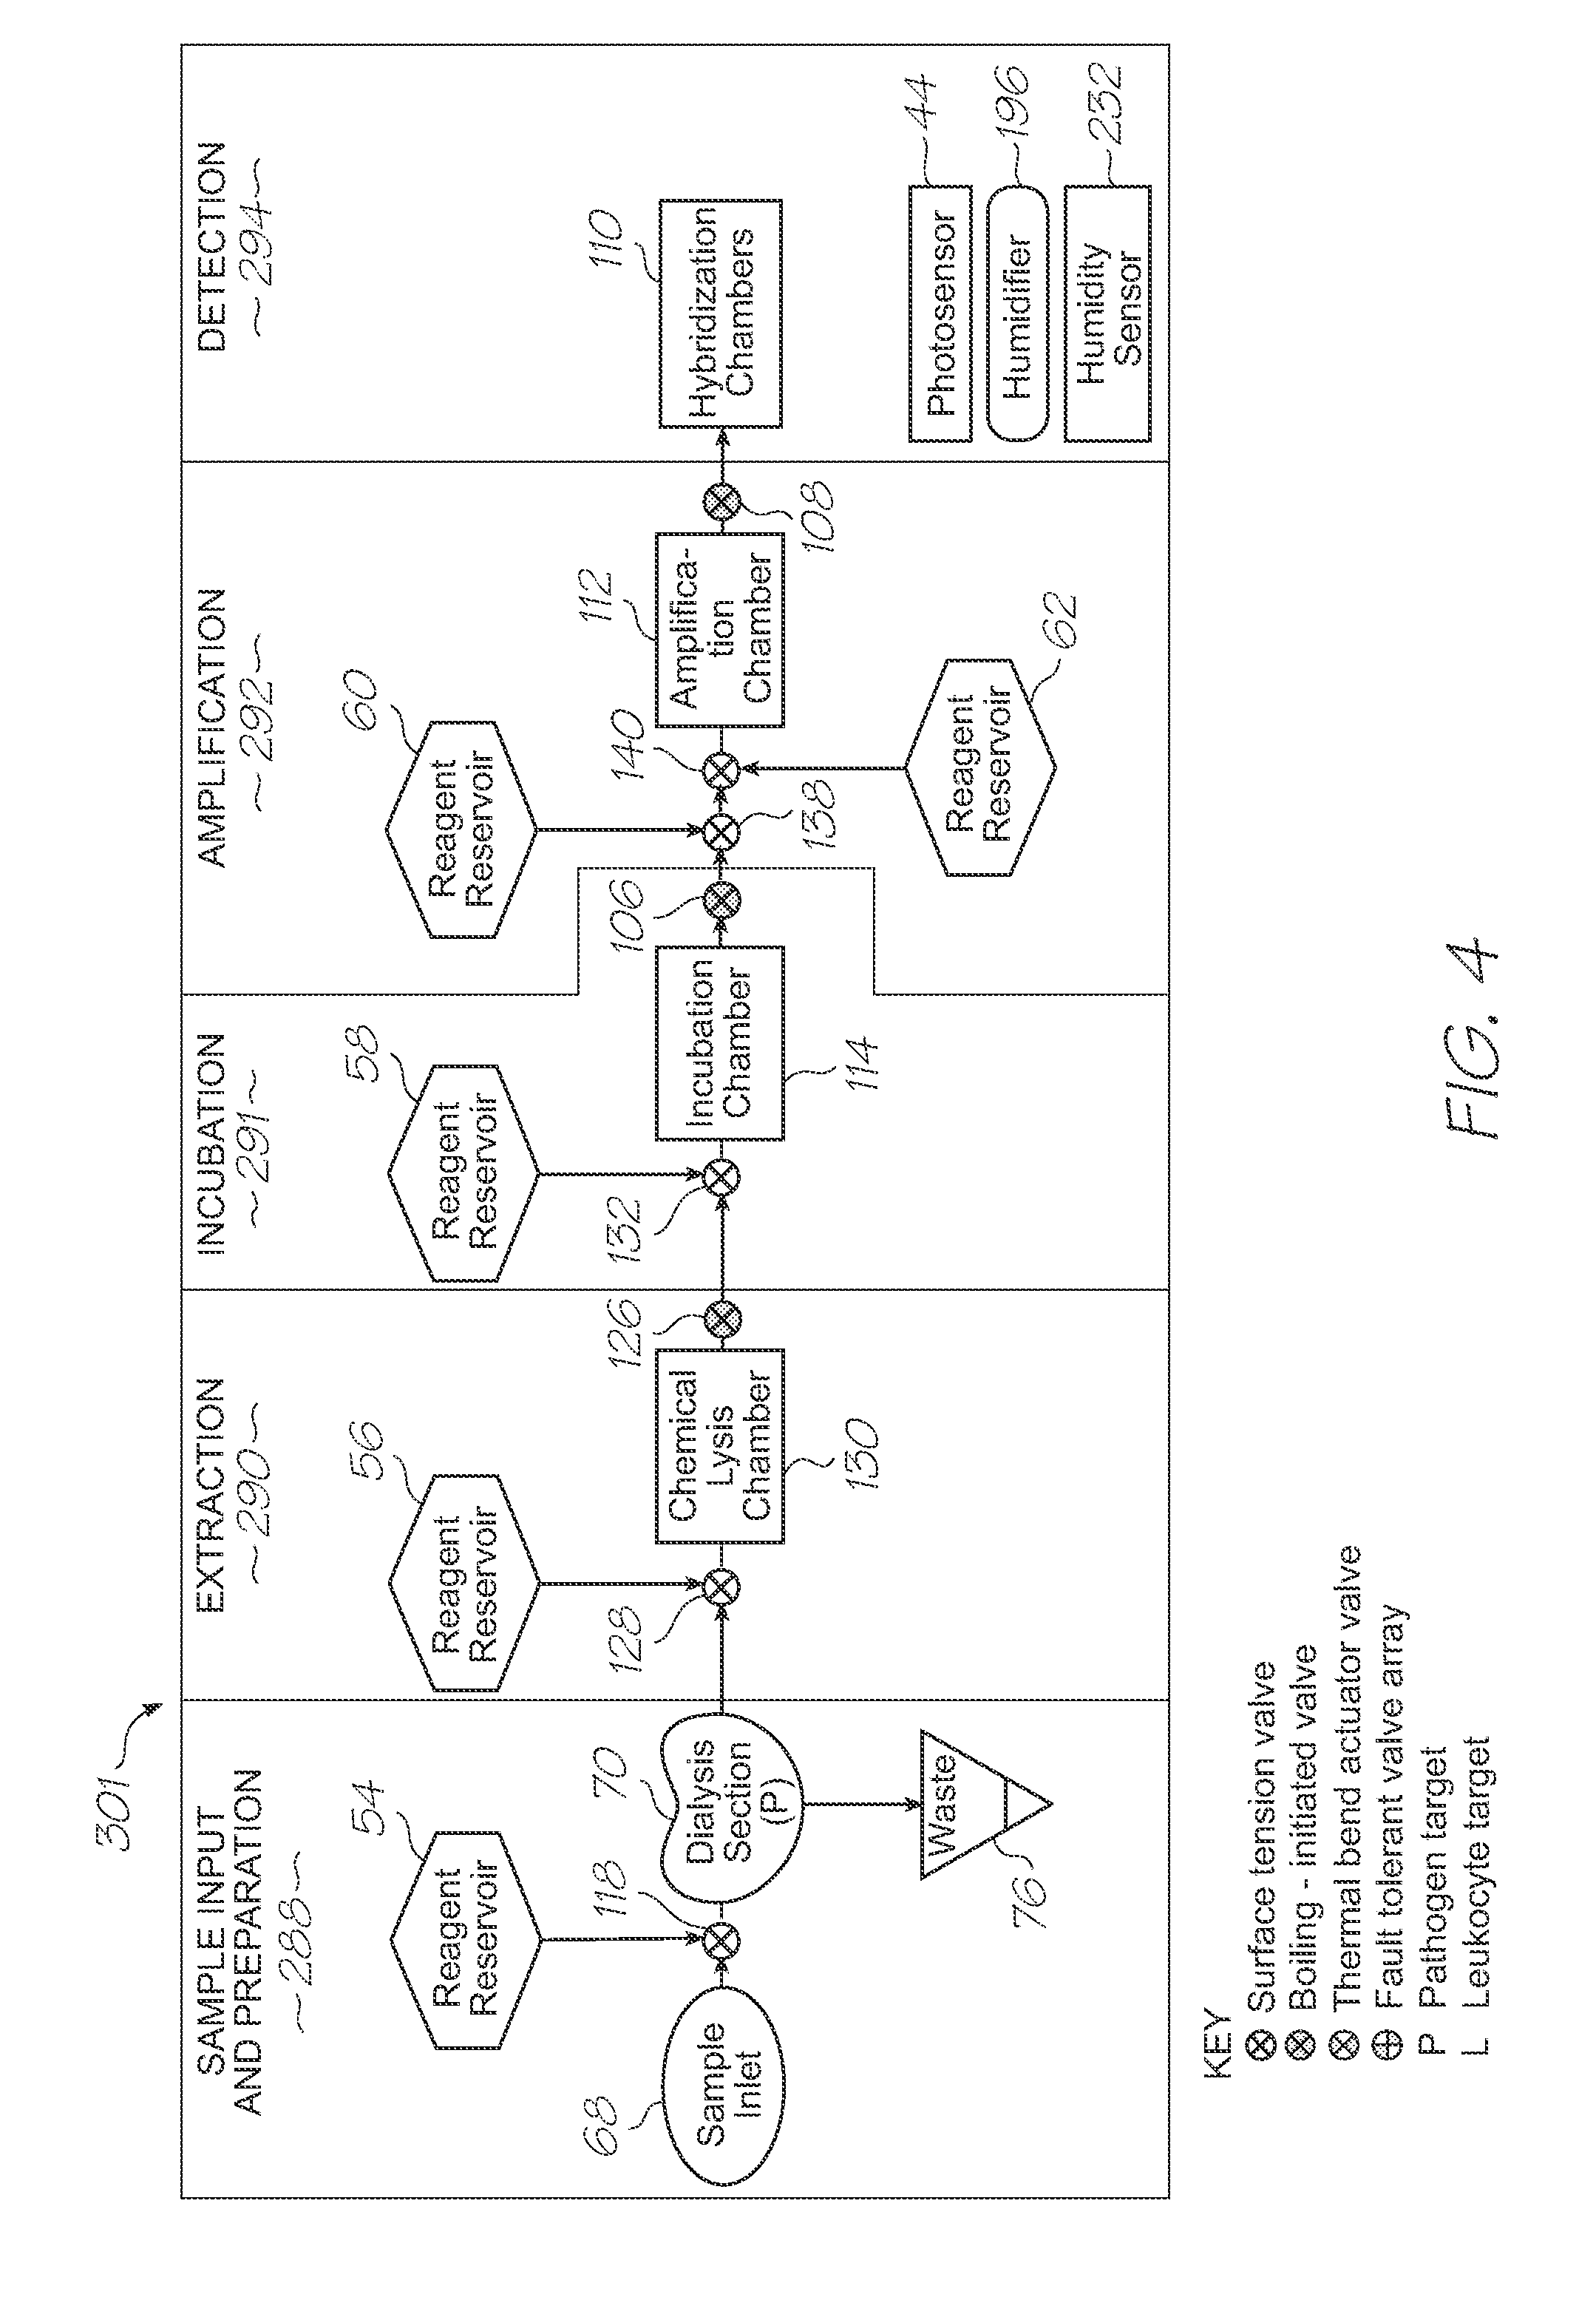 Loc device for electrochemiluminescent detection of target nucleic acid sequences using hybridization chamber array and negative control chamber without probes